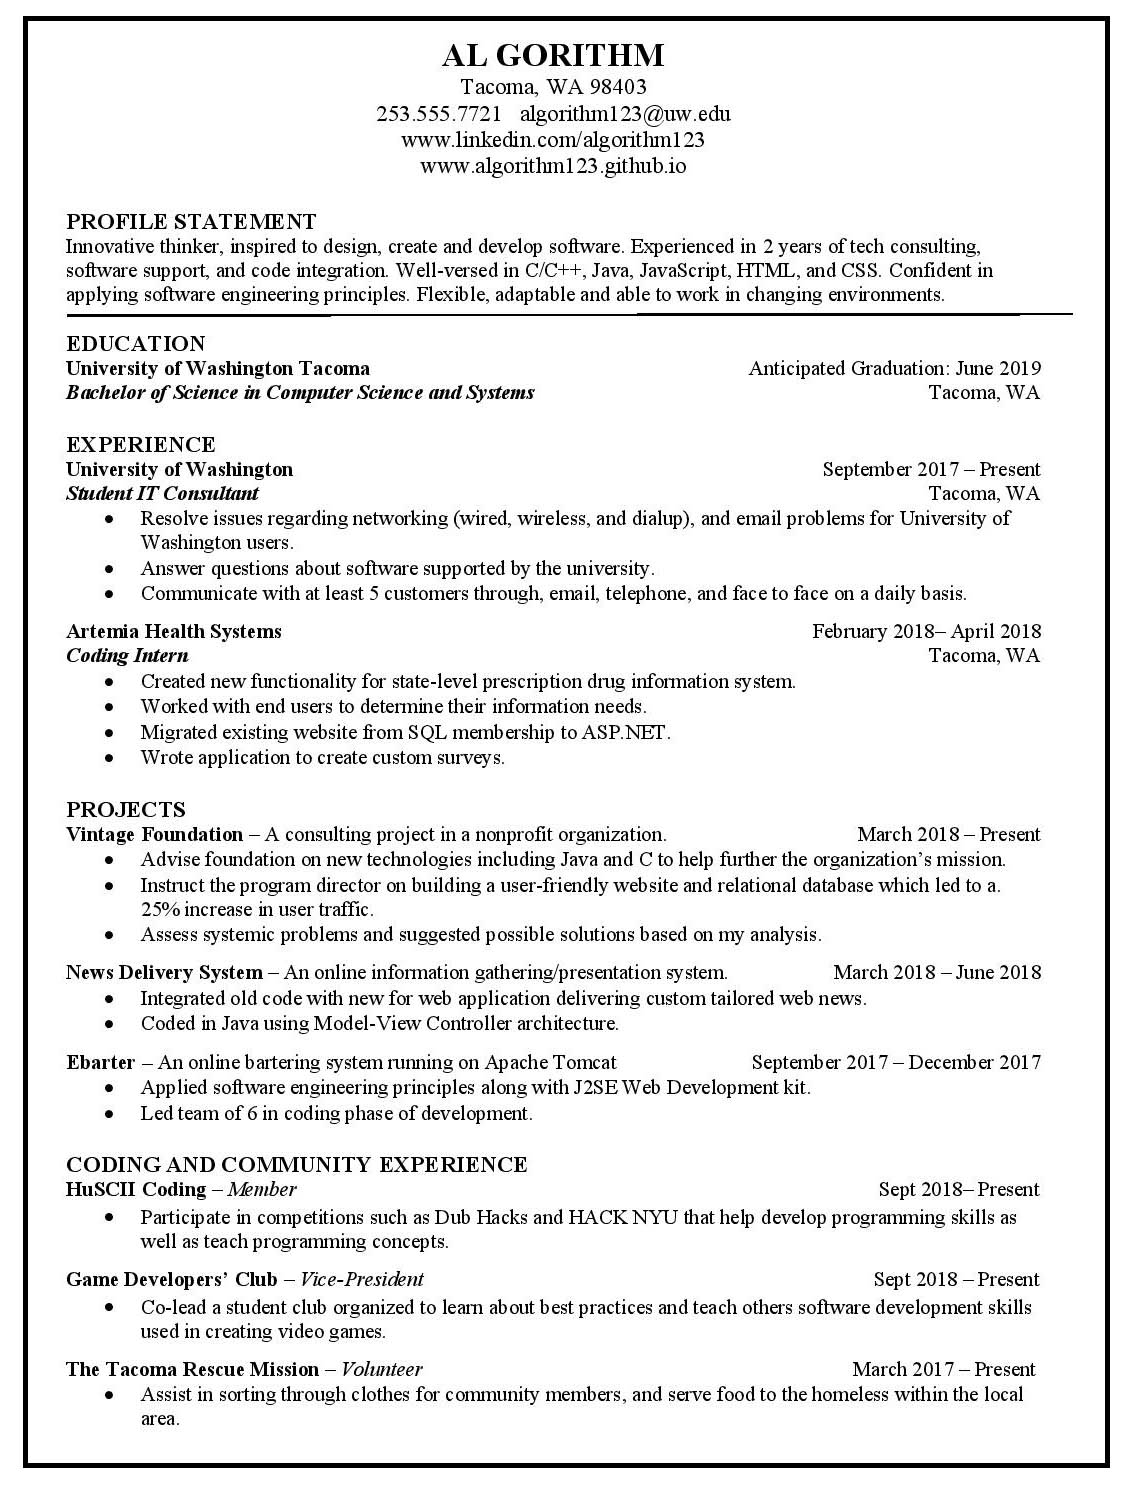 Image of example resume